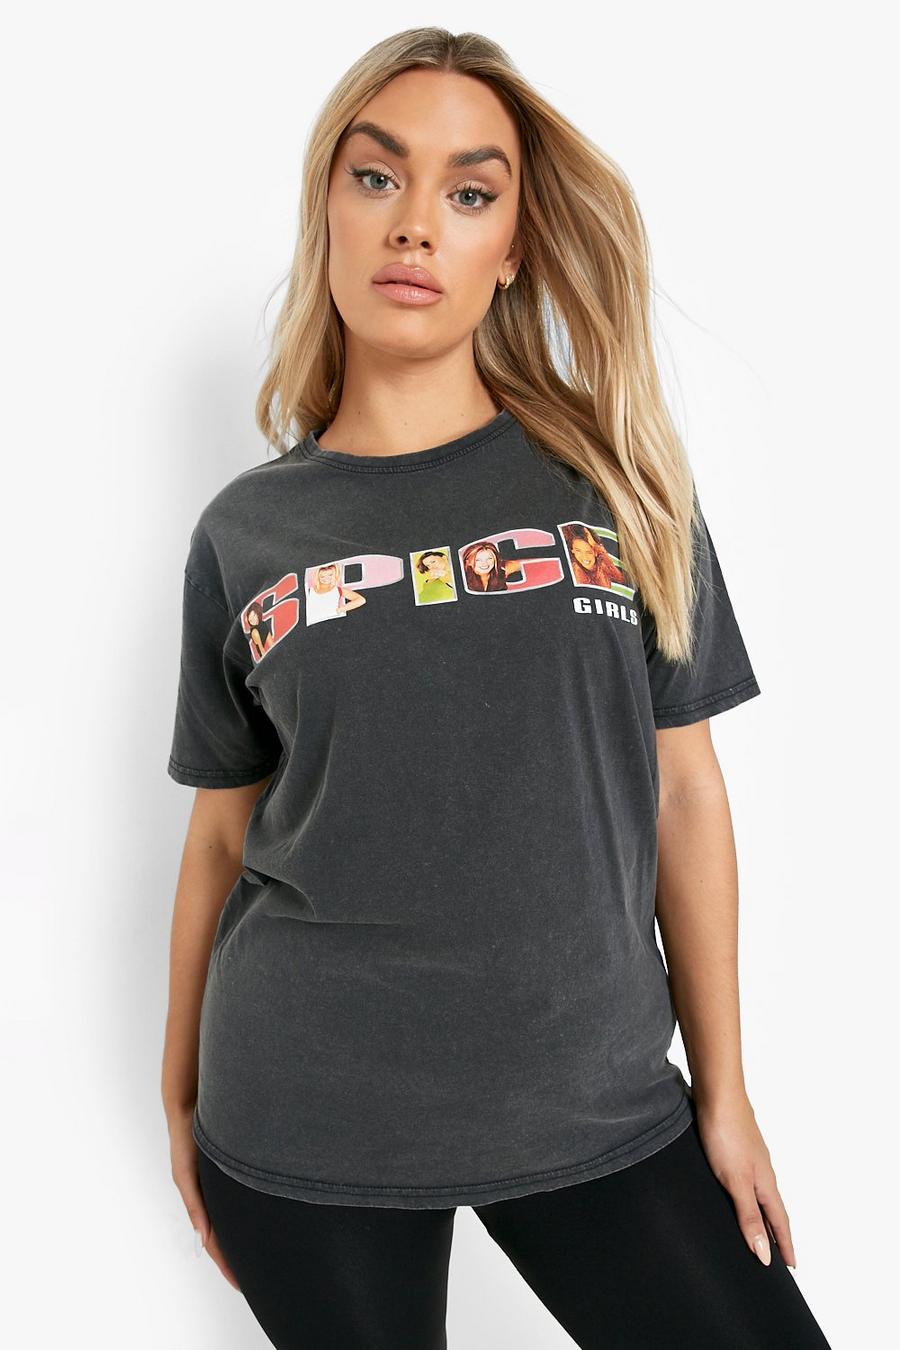 T-shirt Plus Size ufficiale Spice Girls in lavaggio acido, Charcoal